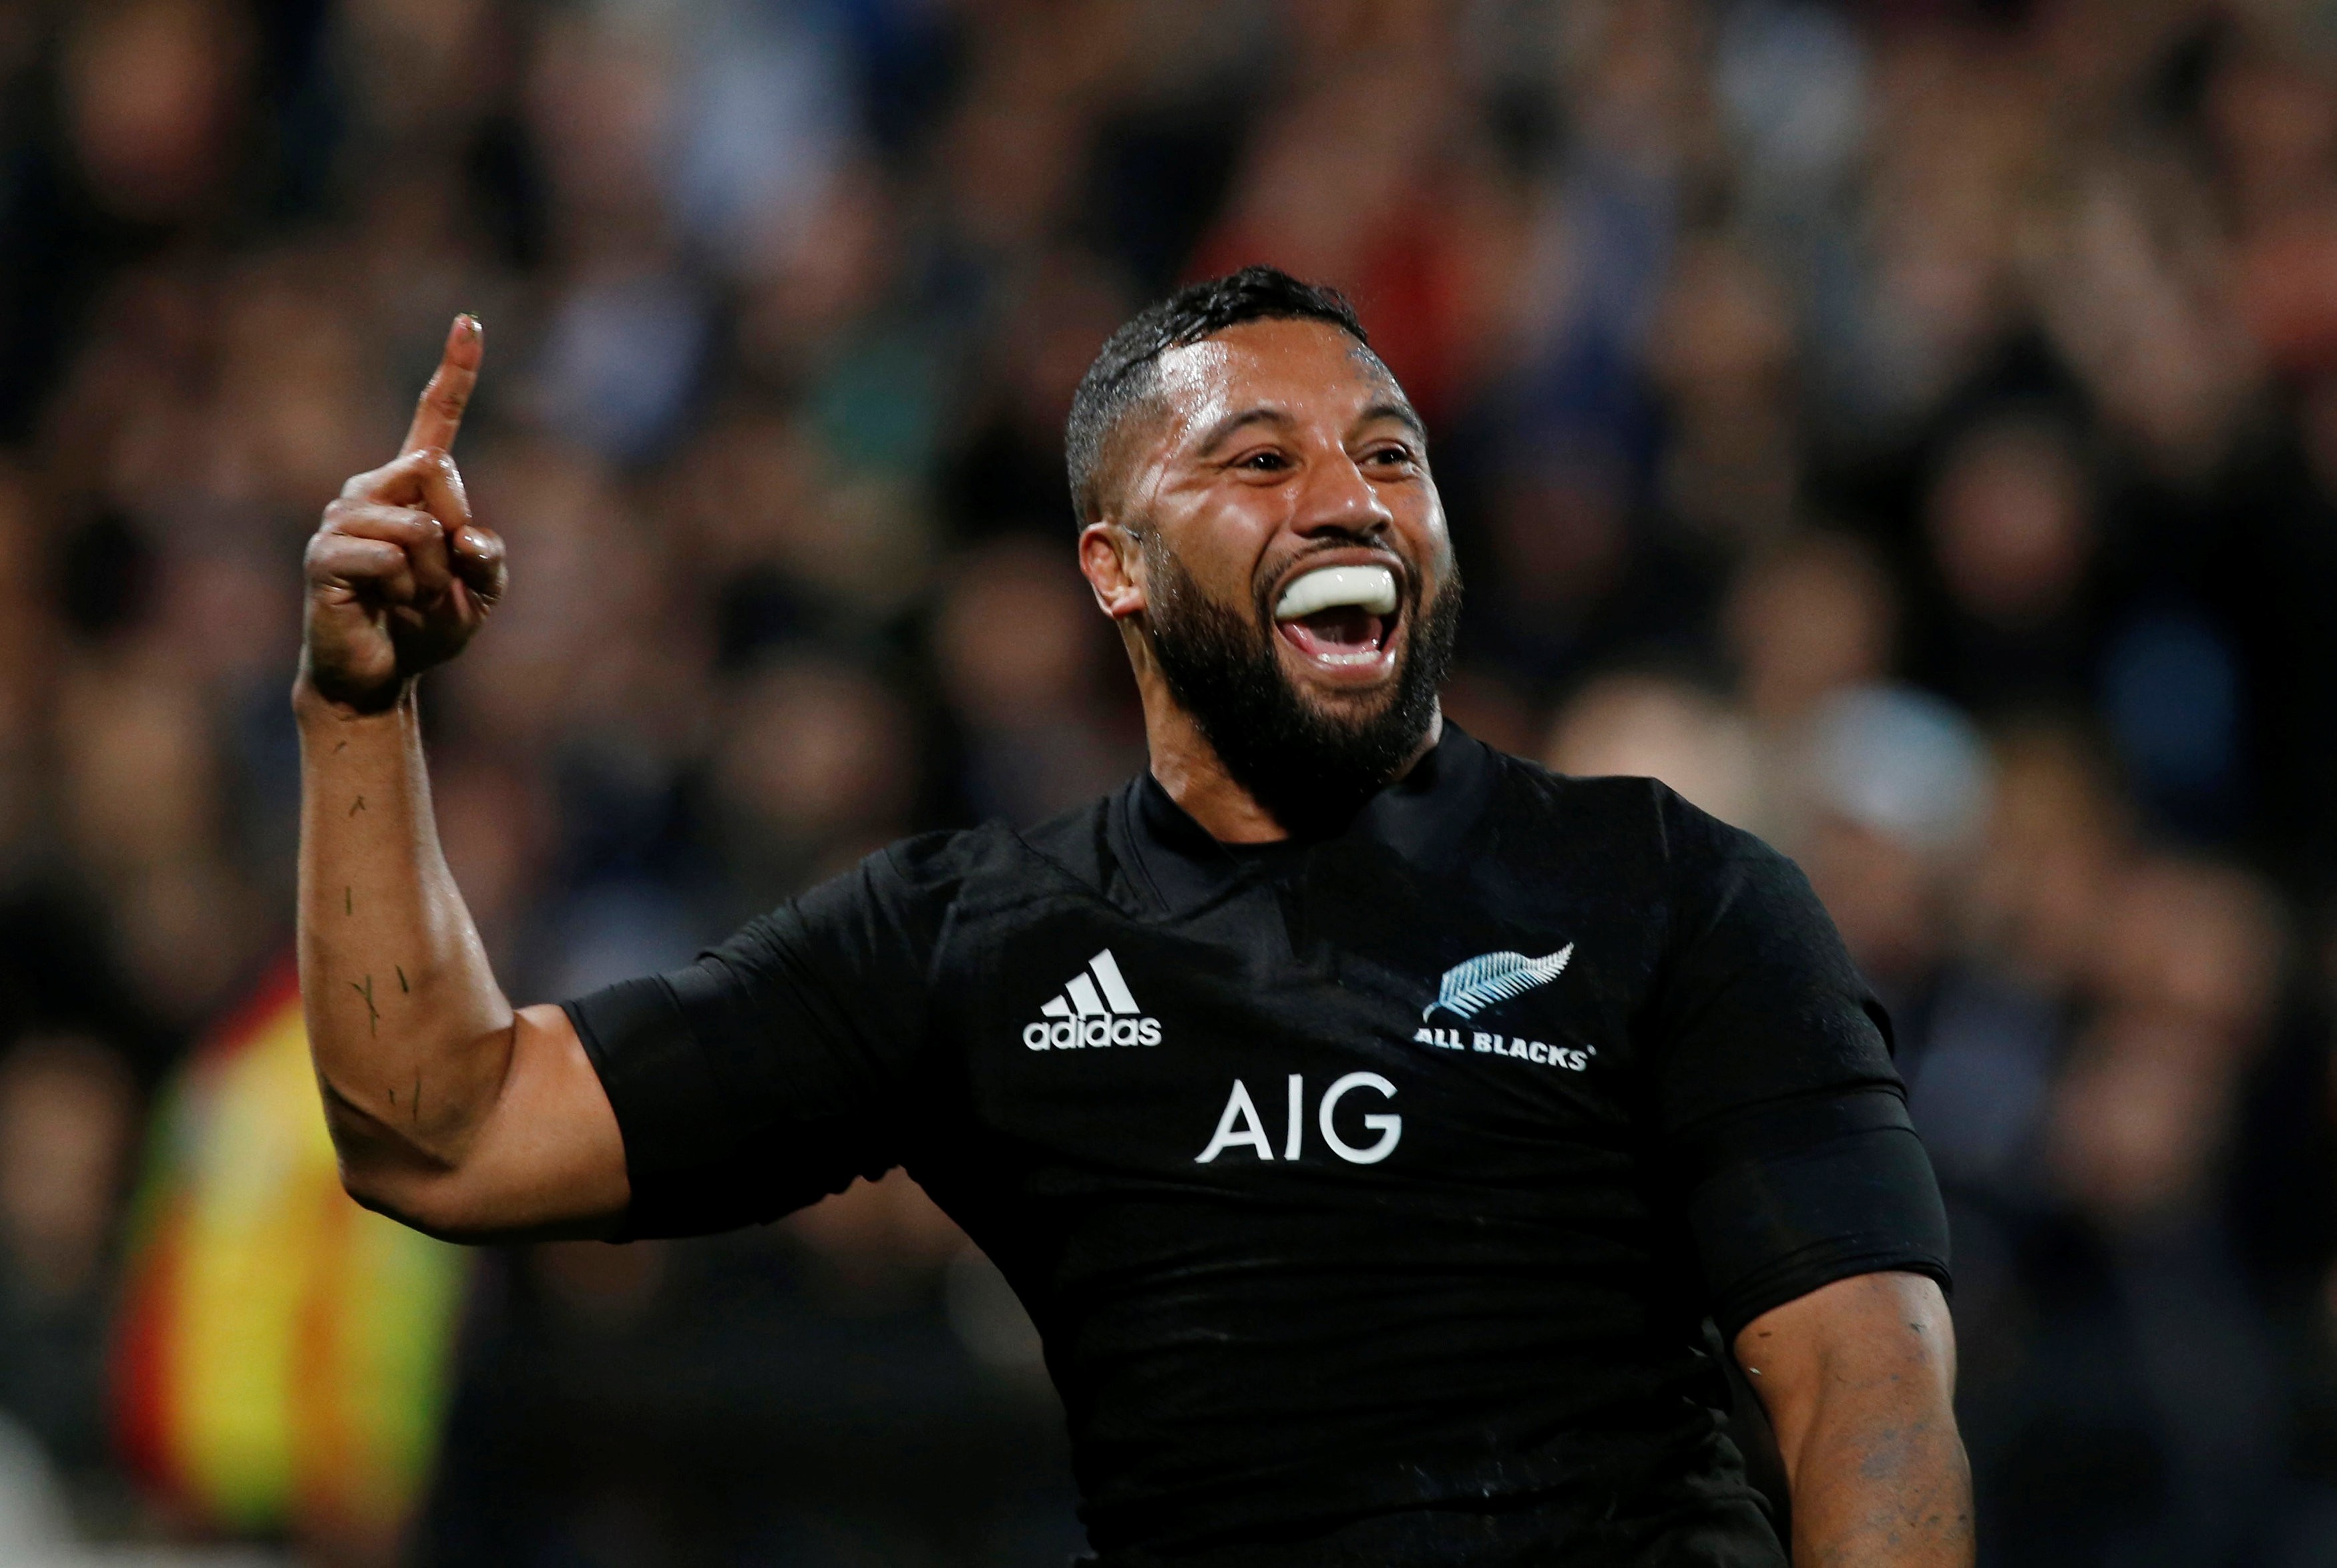 New Zealand’s Lima Sopoaga celebrates a try in his side’s 57-0 romp. Photo: Reuters